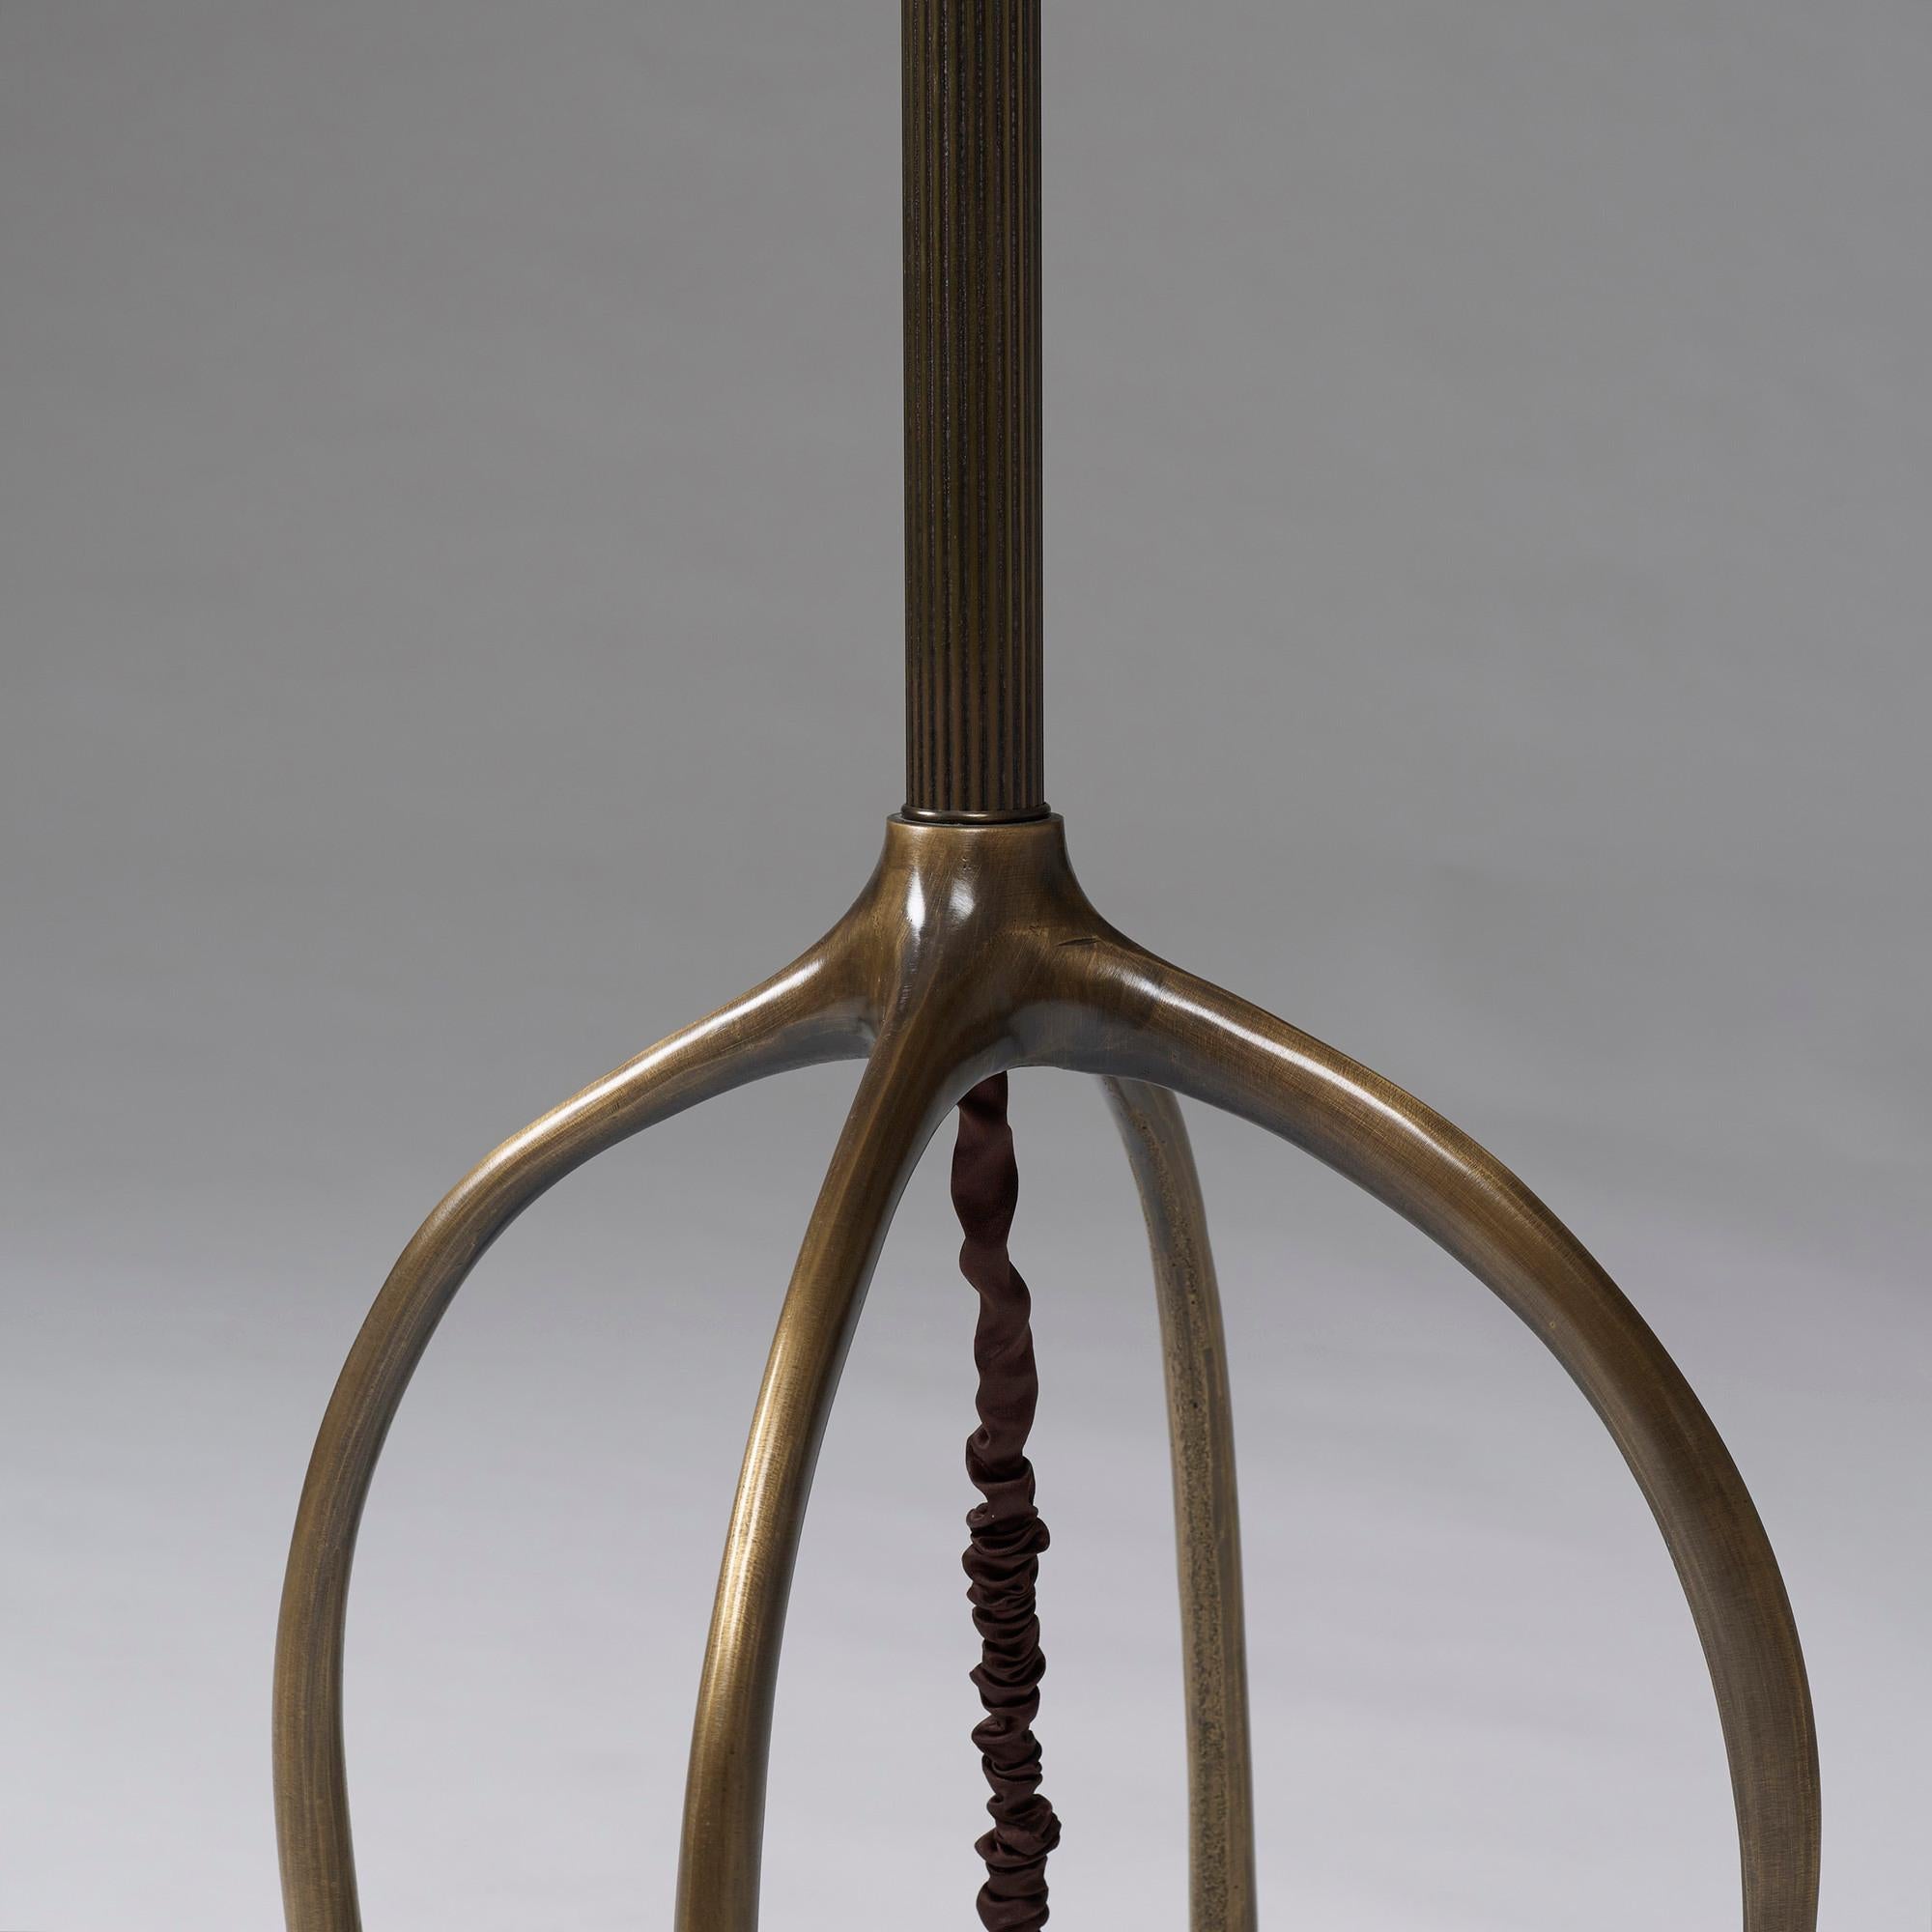 Jordan Mozer (b. 1958), H57 Torchiere/ Floor Lamp; Cast Bronze, Blown Glass, Made in Chicago, USA,  This standing lamp is a 2015 variation on the 2008 design created for Hotel 57.  15